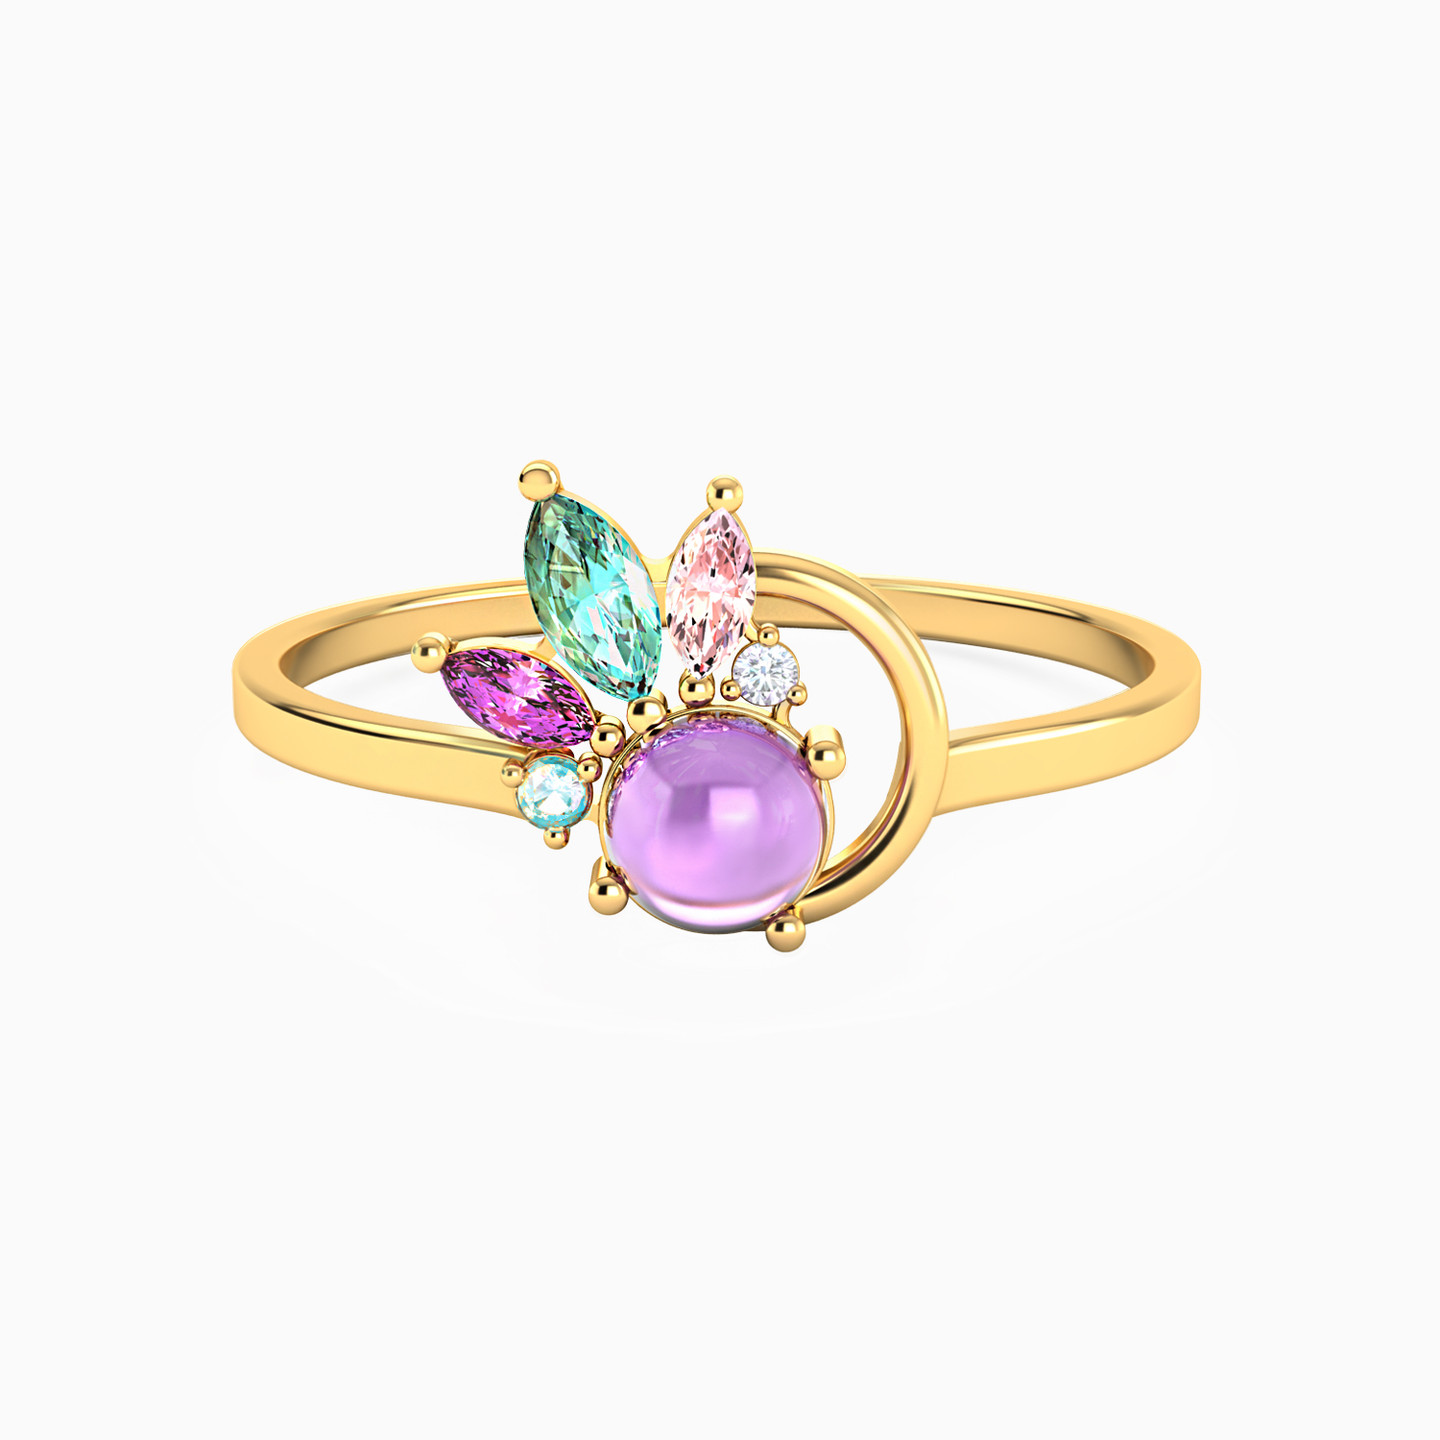 14K Gold Colored Stones Statement Ring